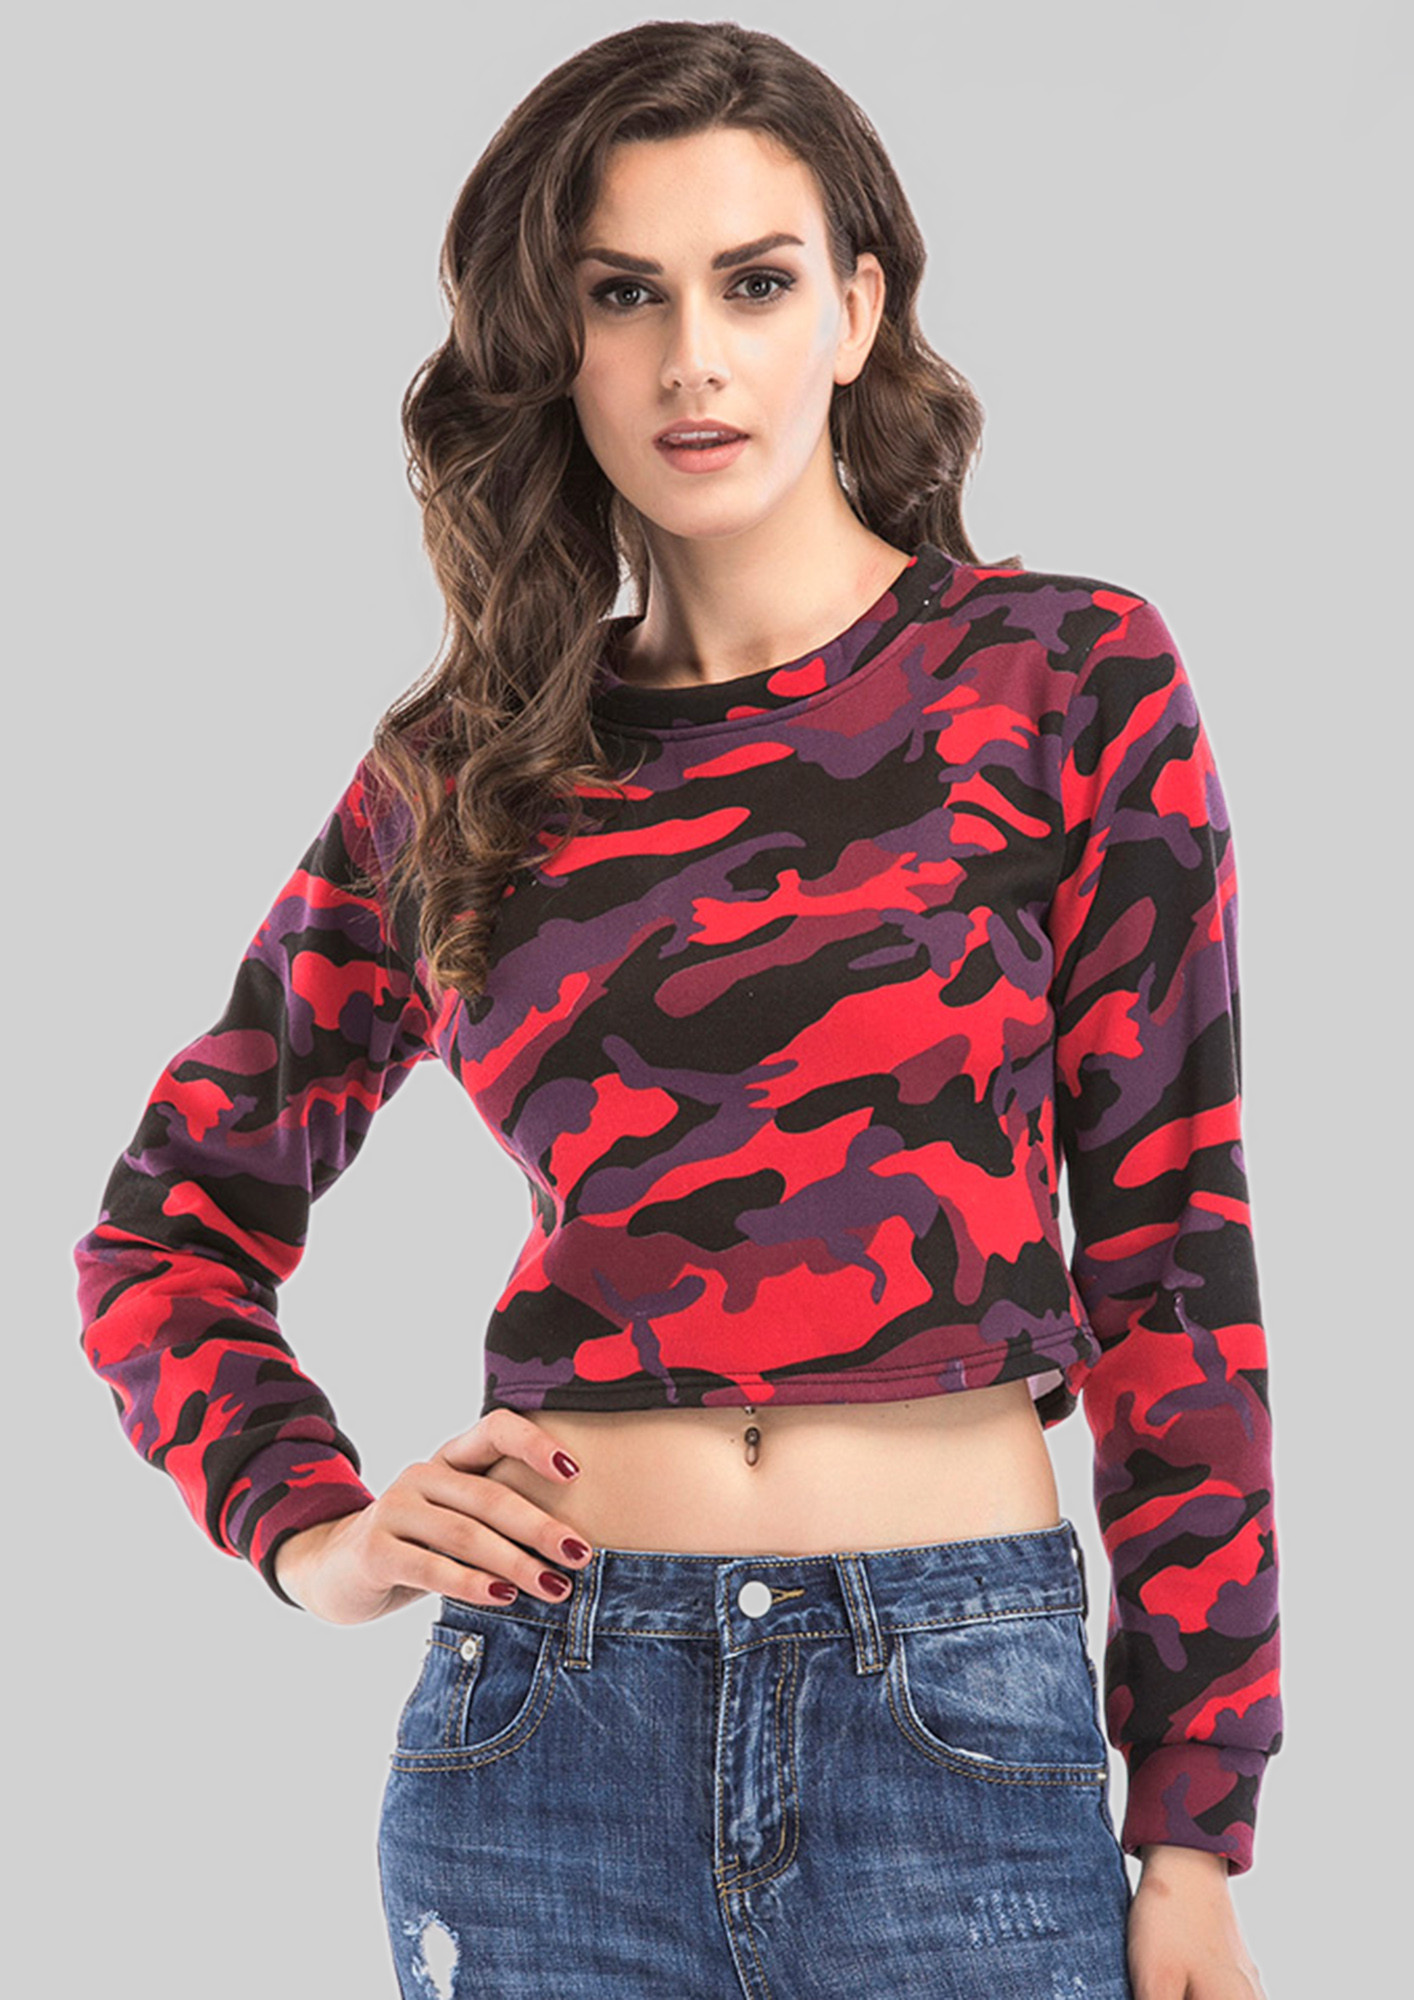 A CREW NECK PRINTED RED RELAXED CROP TOP